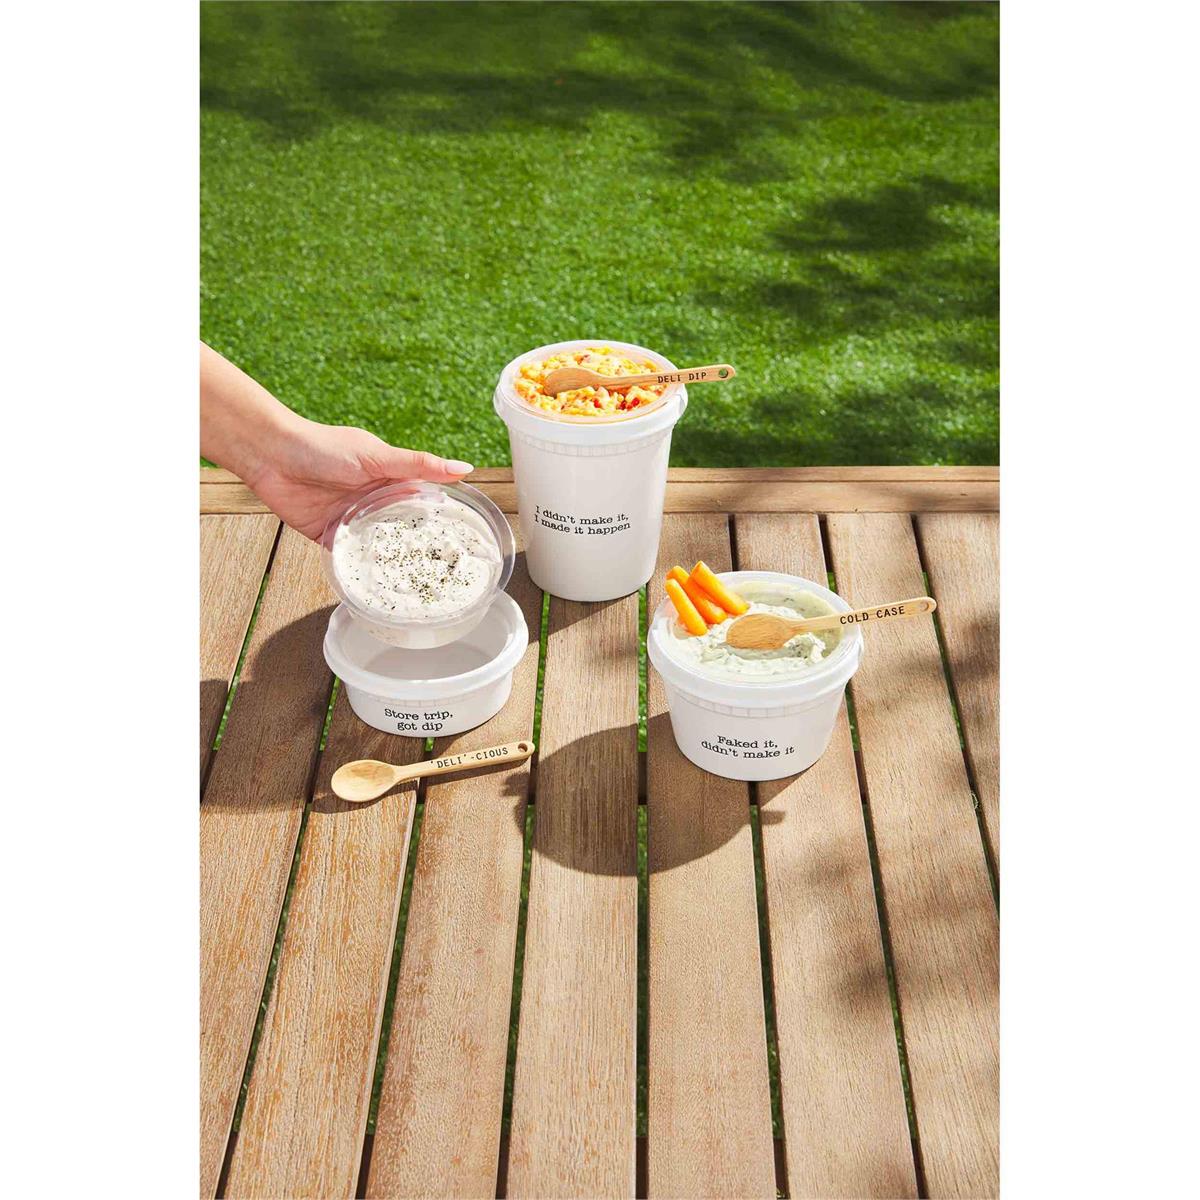 Store Bought Container Sets by Mud Pie